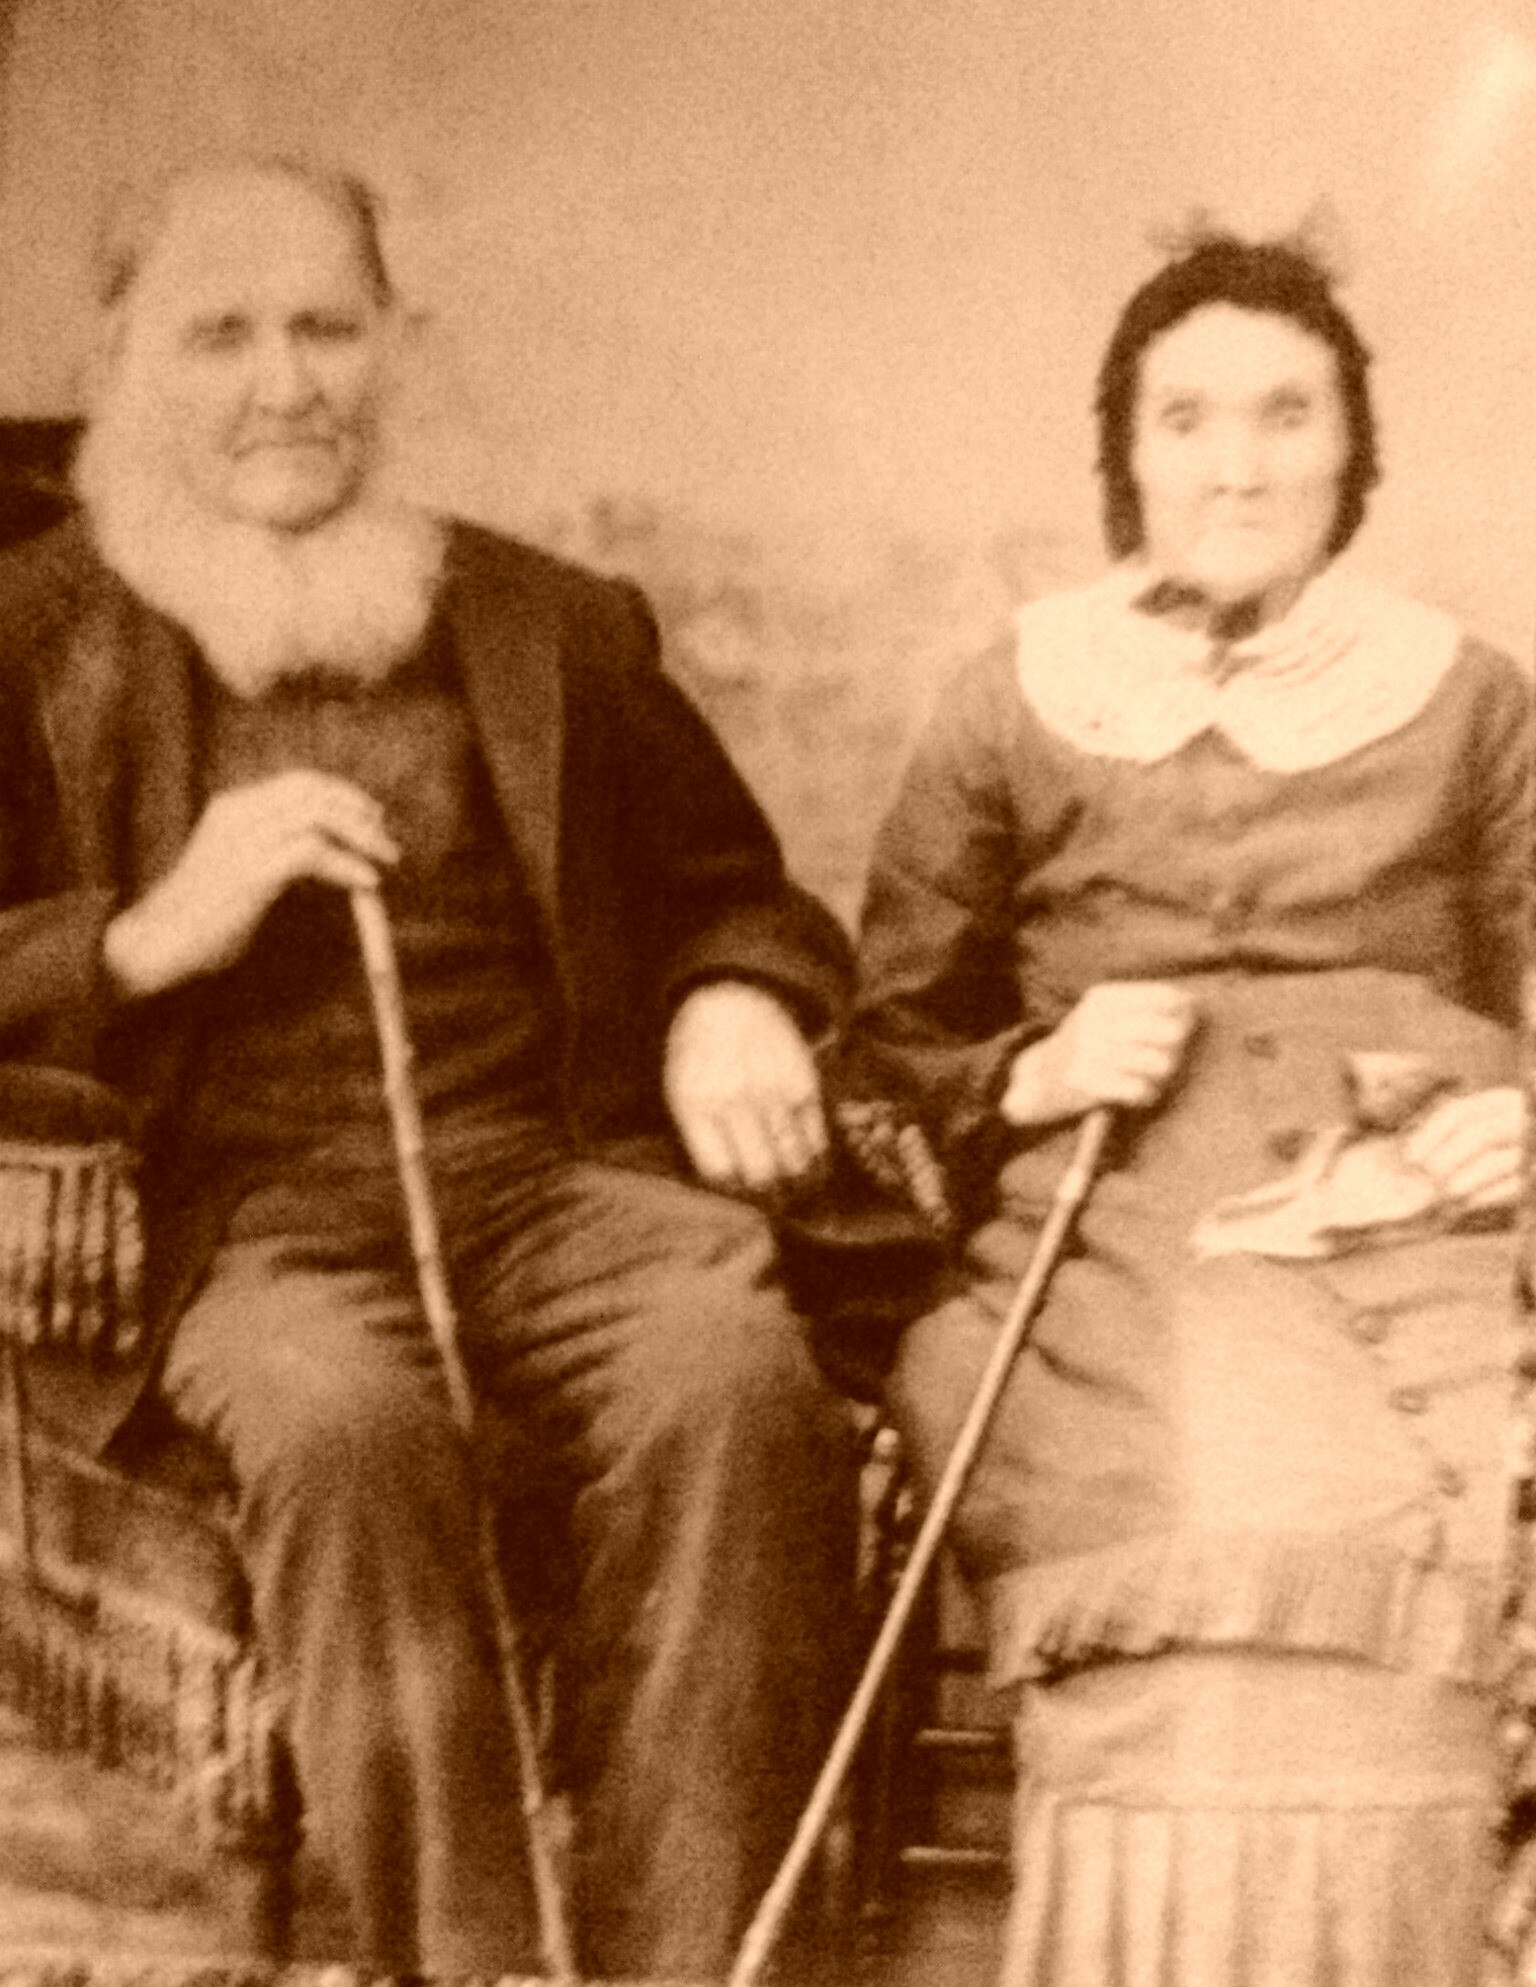 Peter and Mary Beck